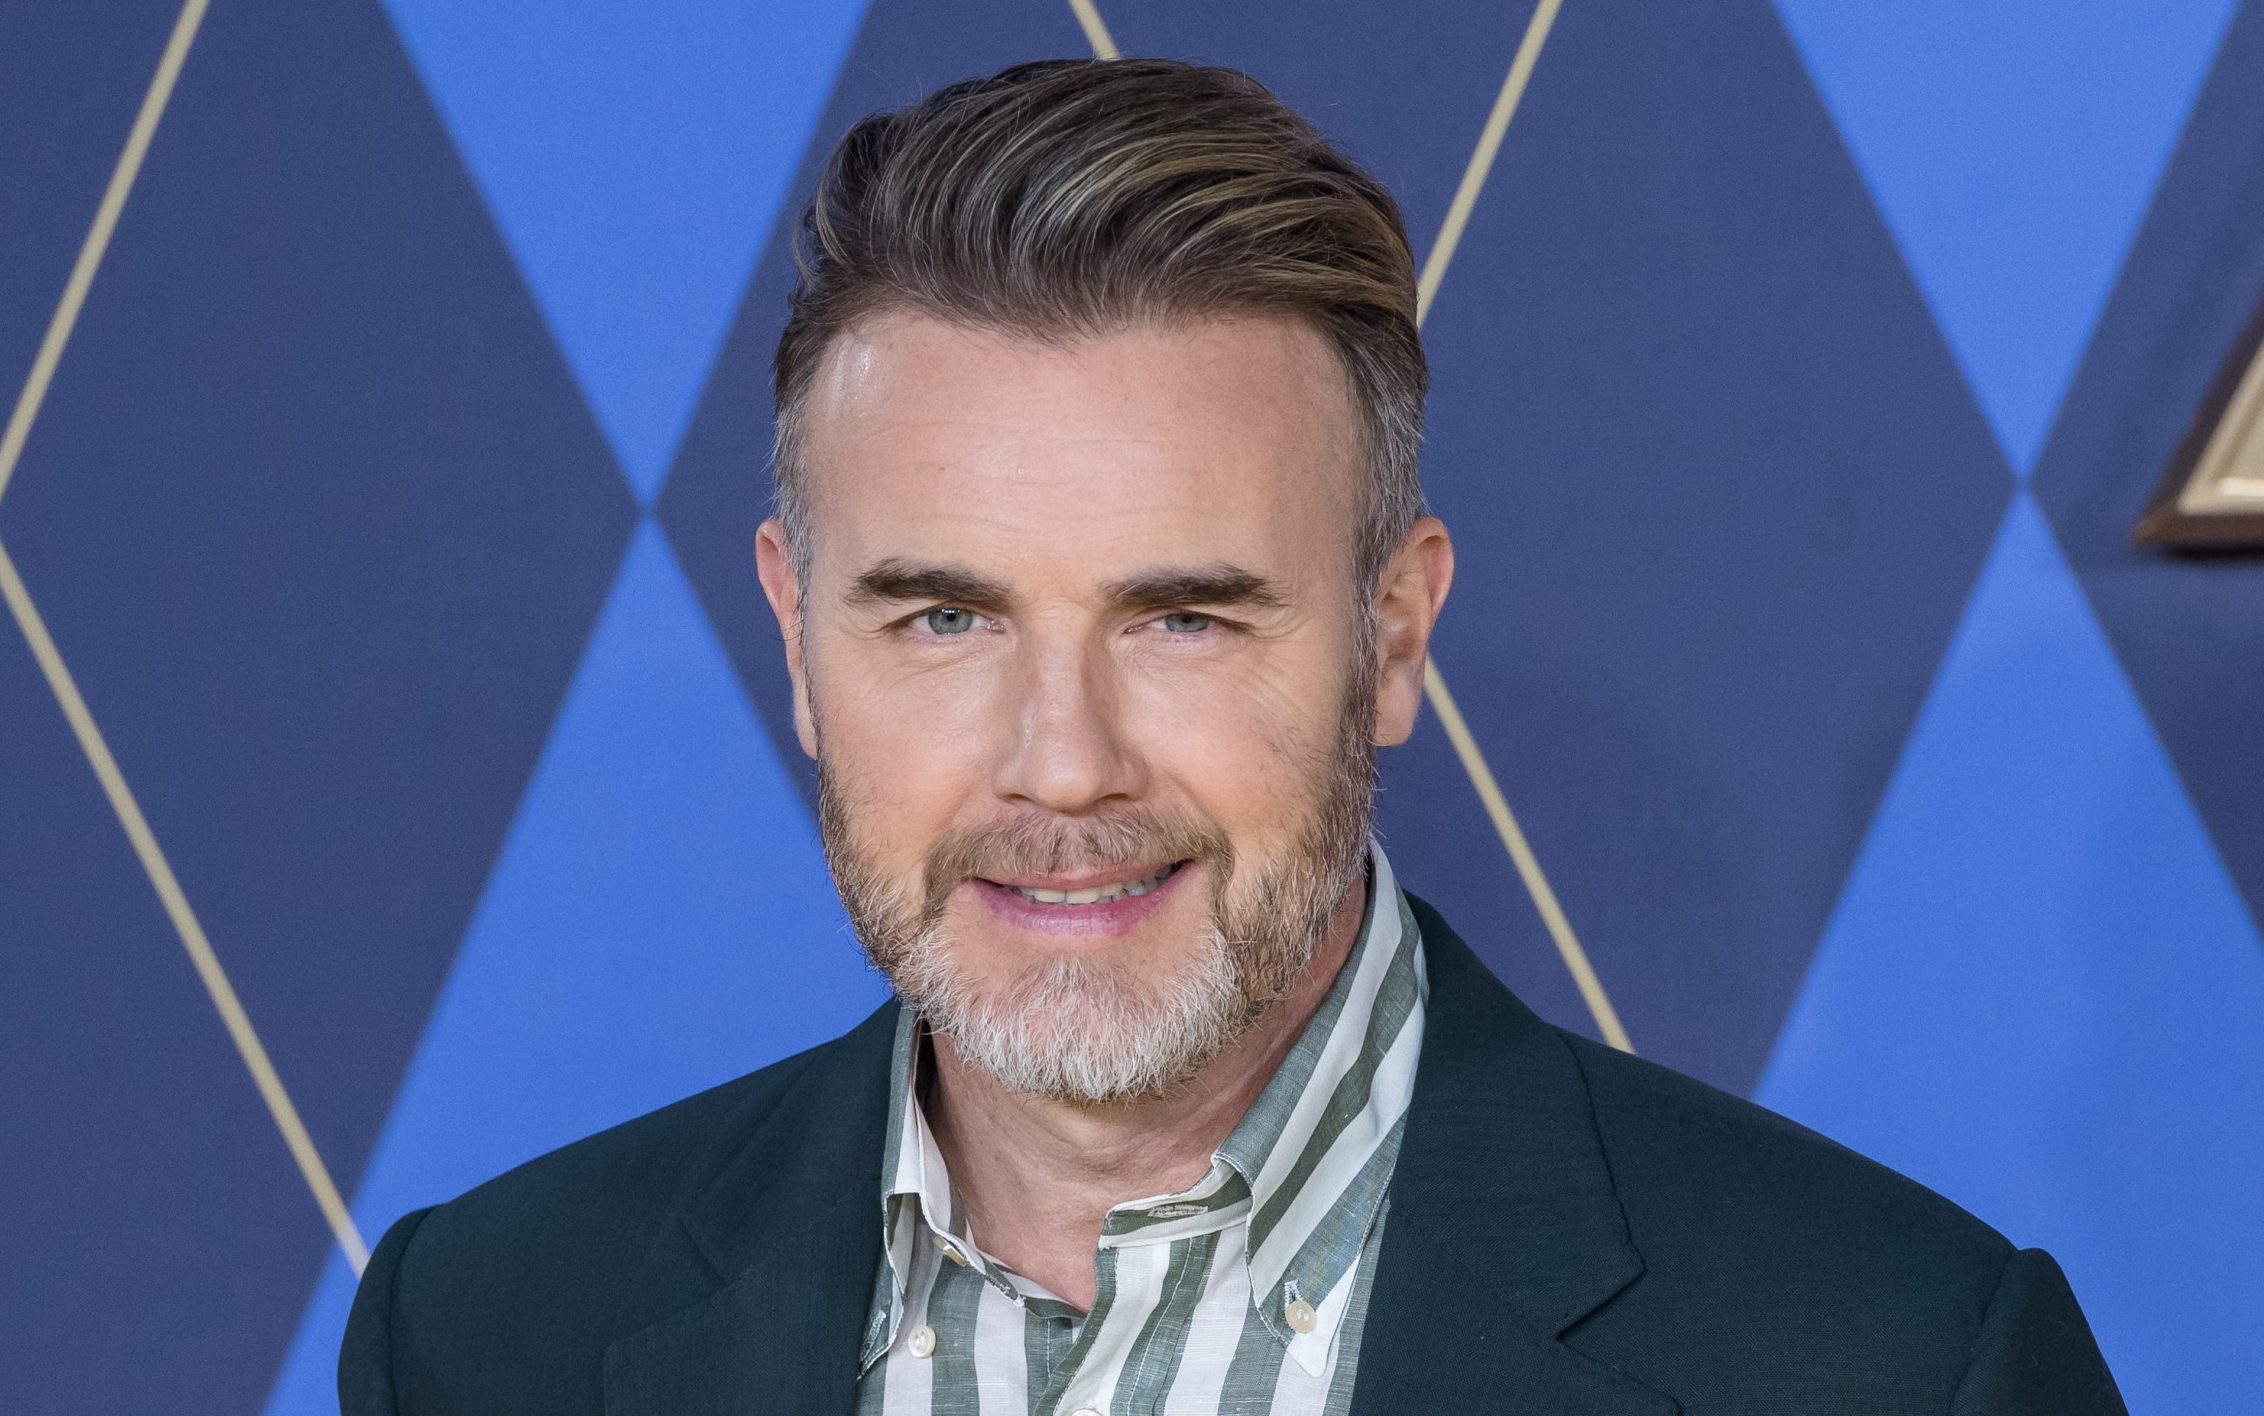 gary barlow’s home burgled while he was away filming for ant and dec show